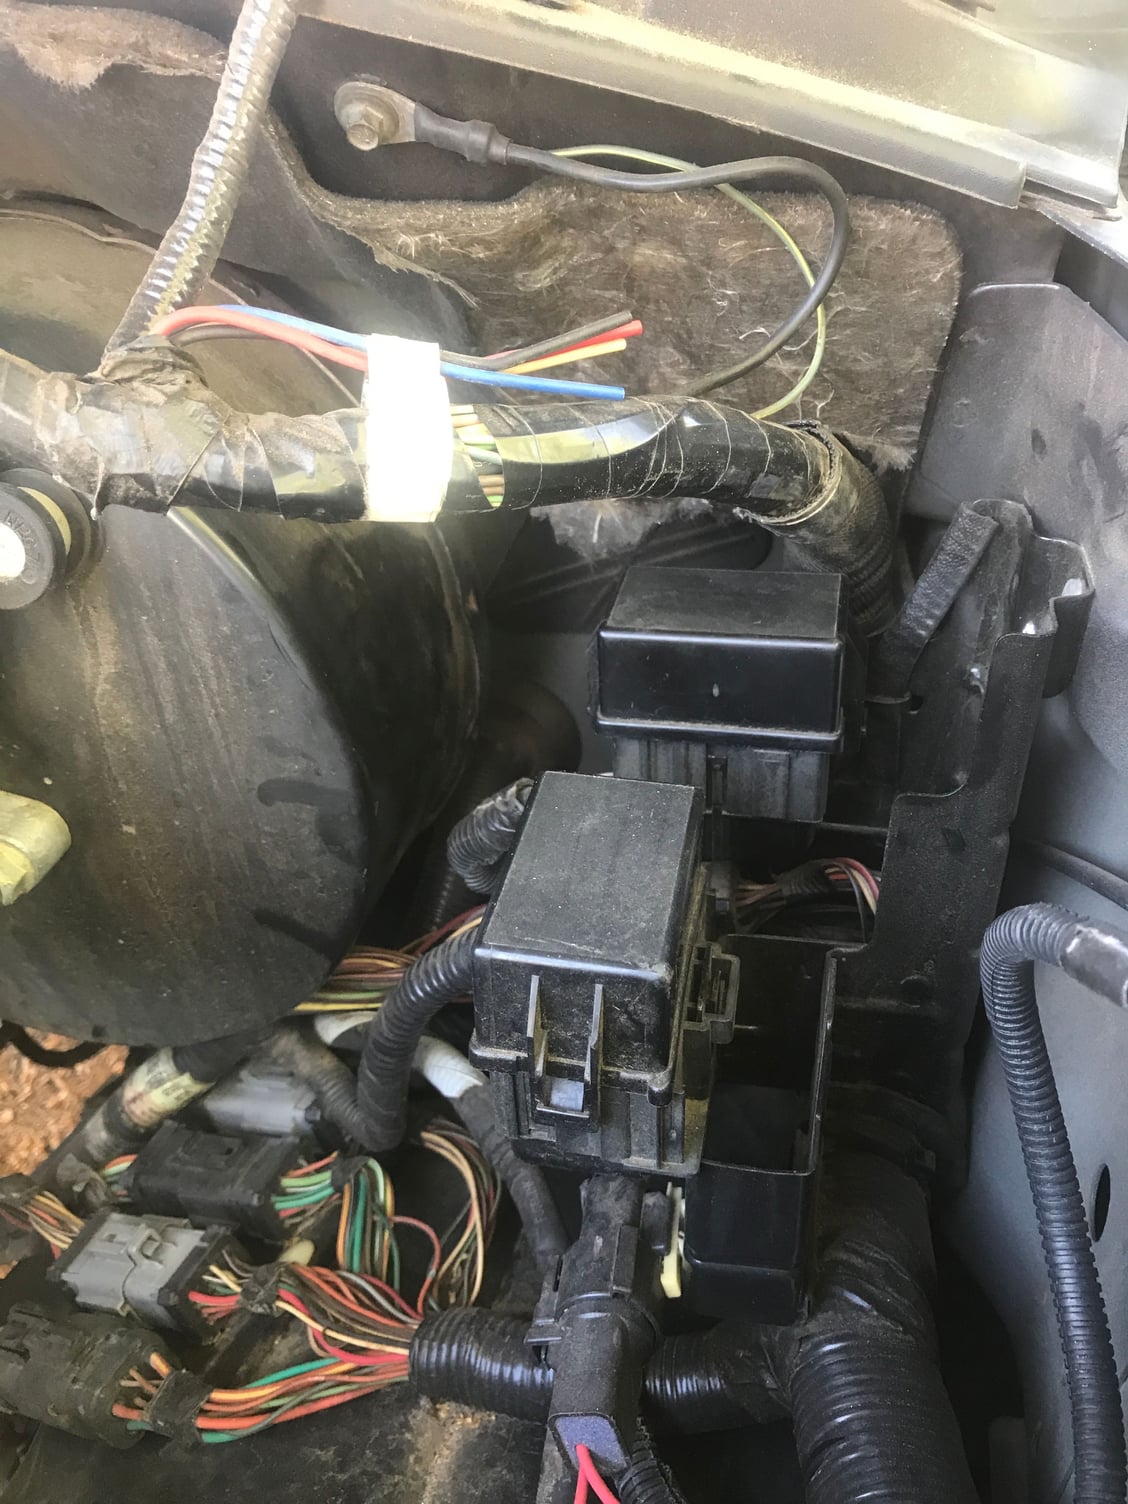 Left trailer running light stays on - Ford Truck Enthusiasts Forums 2017 Ford F150 Trailer Lights Not Working